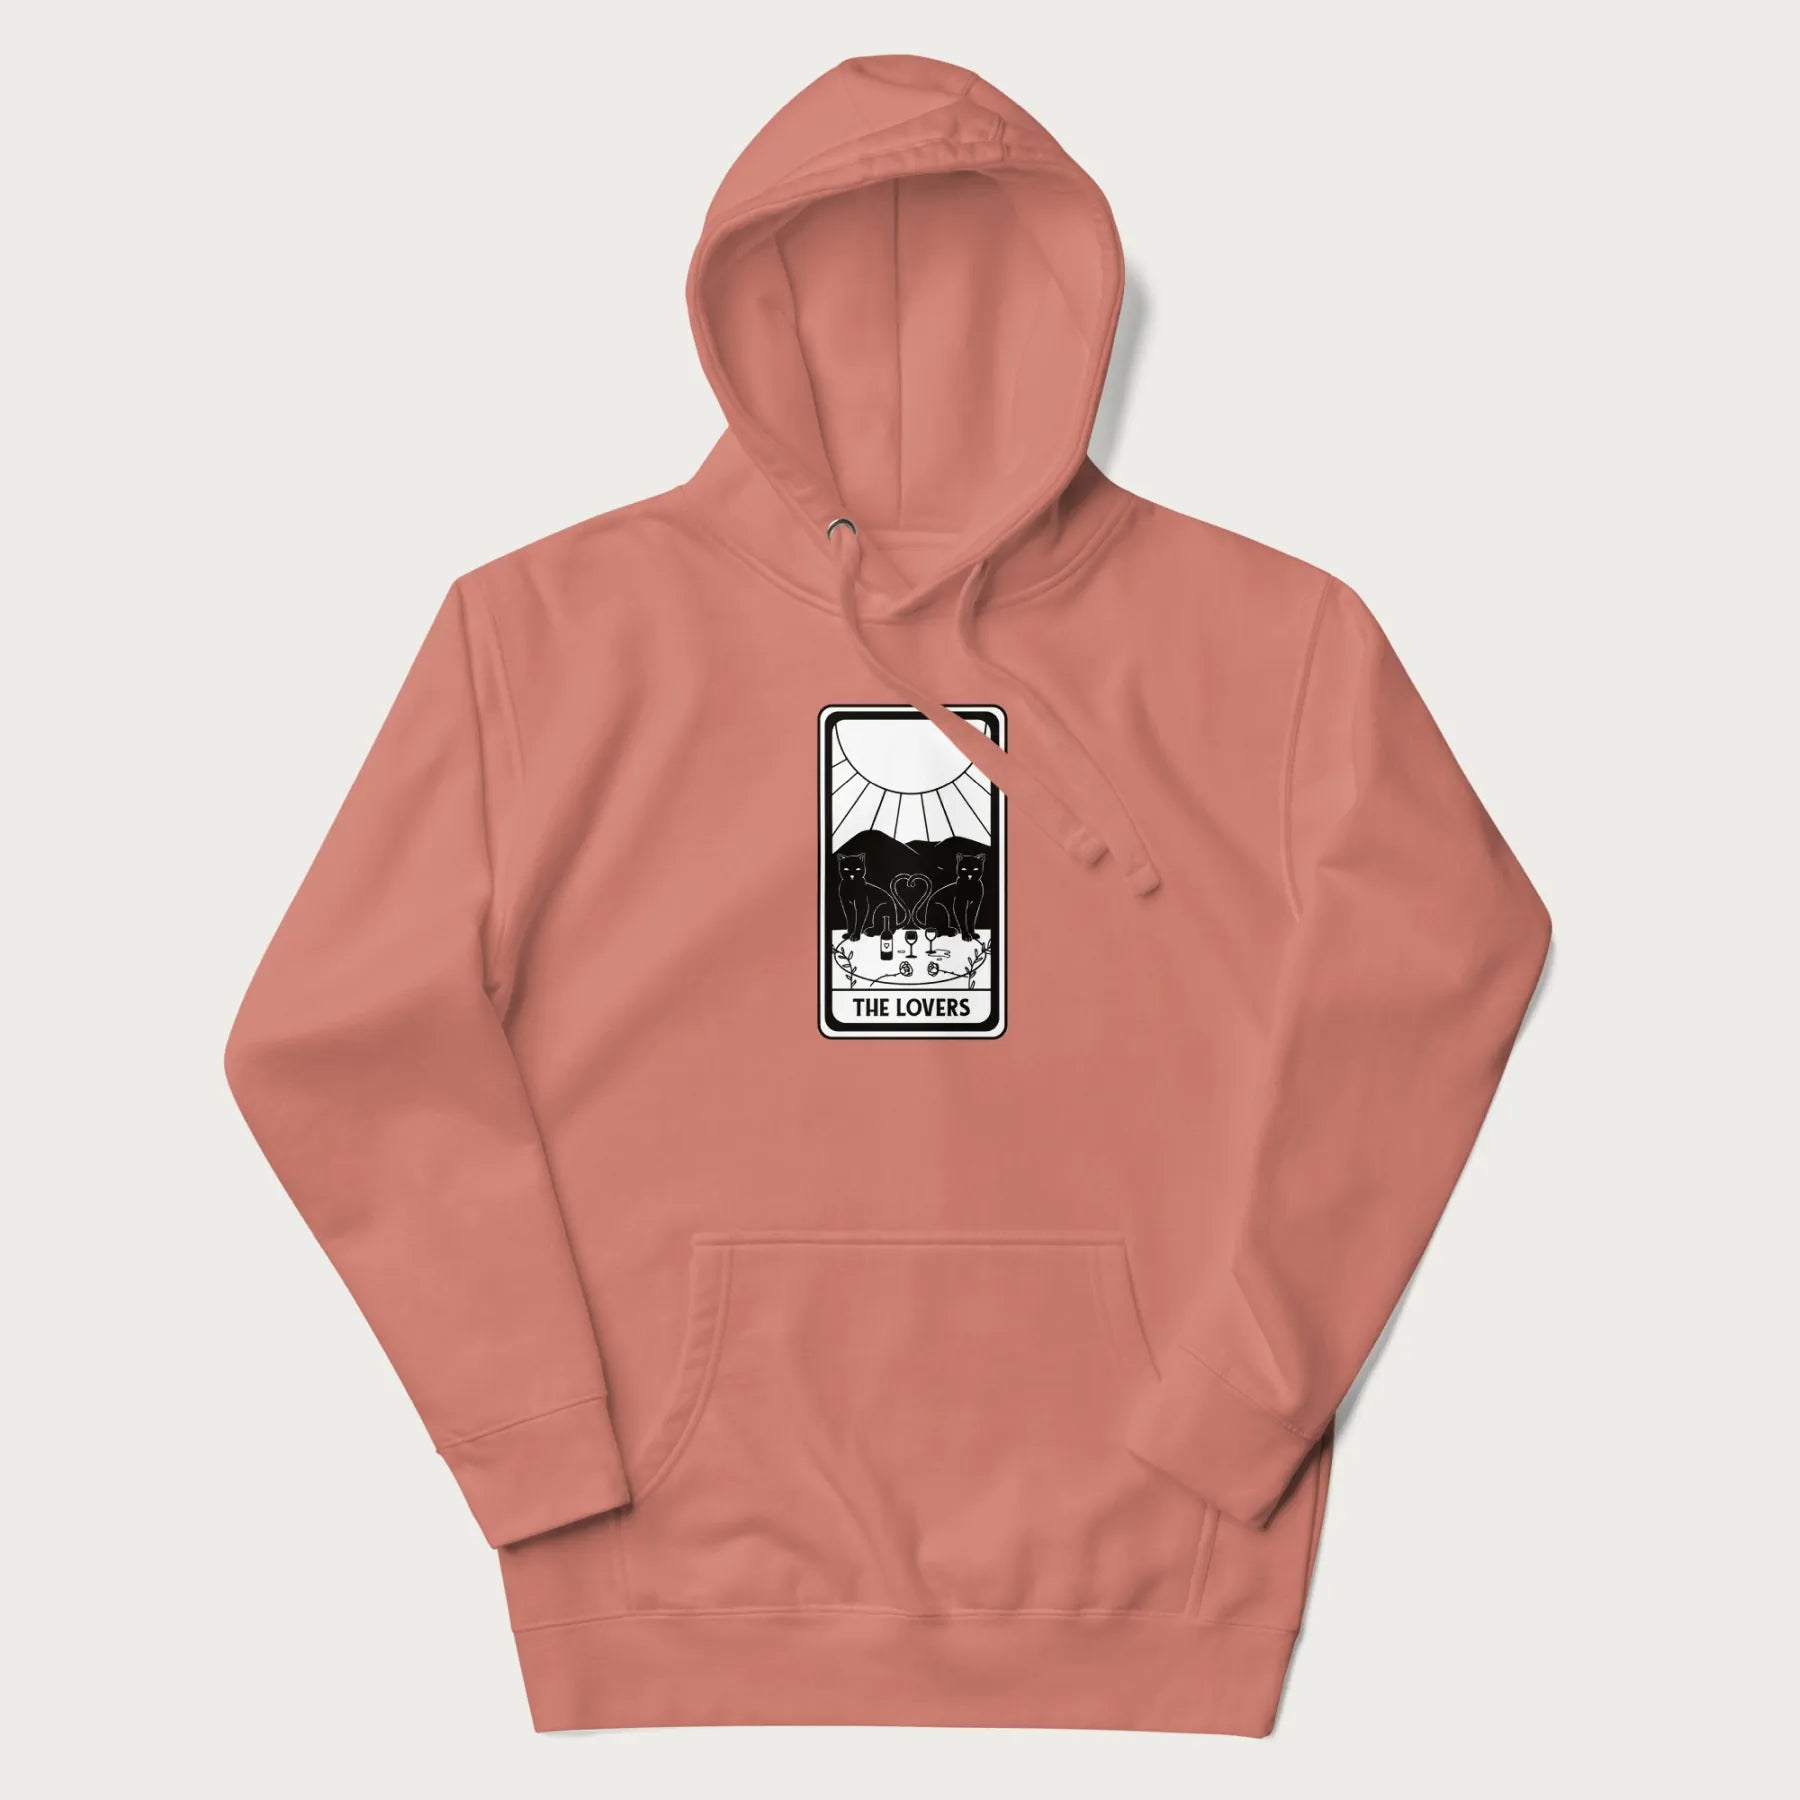 Light pink hoodie with a 'The Lovers' tarot card graphic of two cats with intertwined tails forming a heart, wine, and roses.